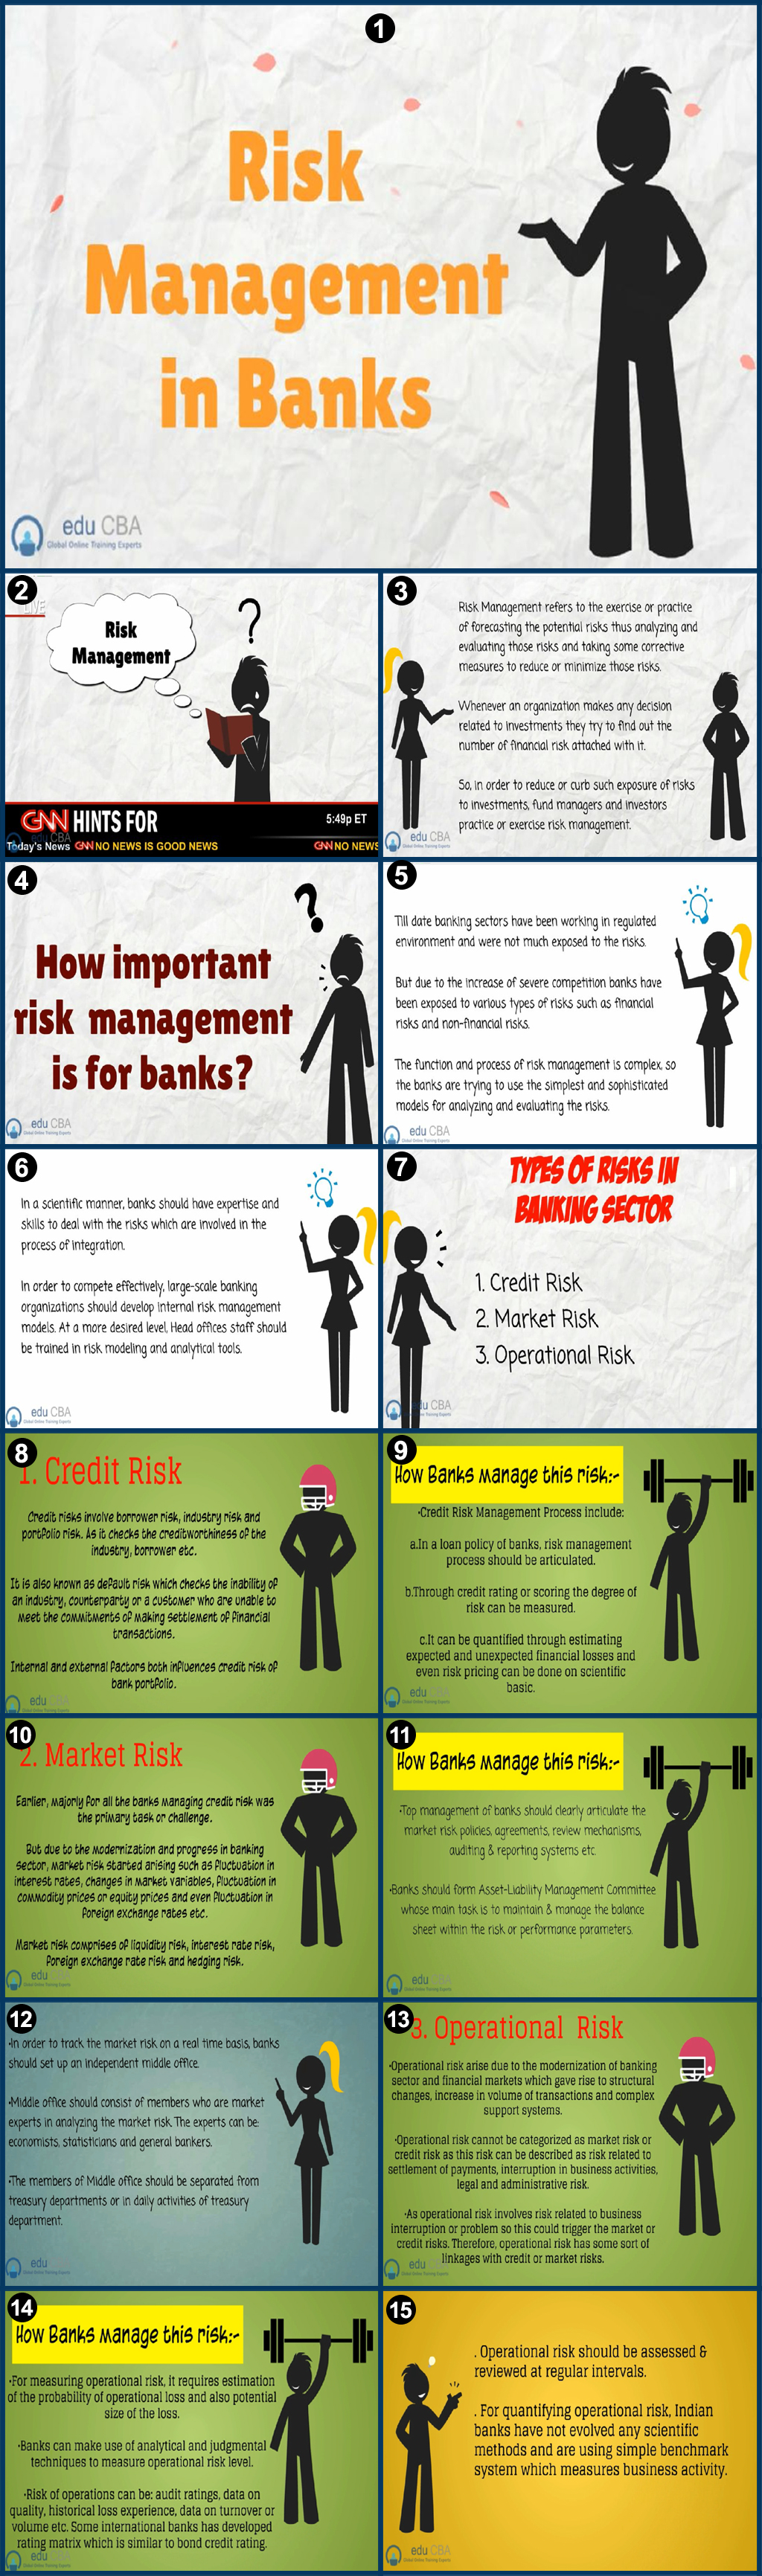 literature review on risk management in banks